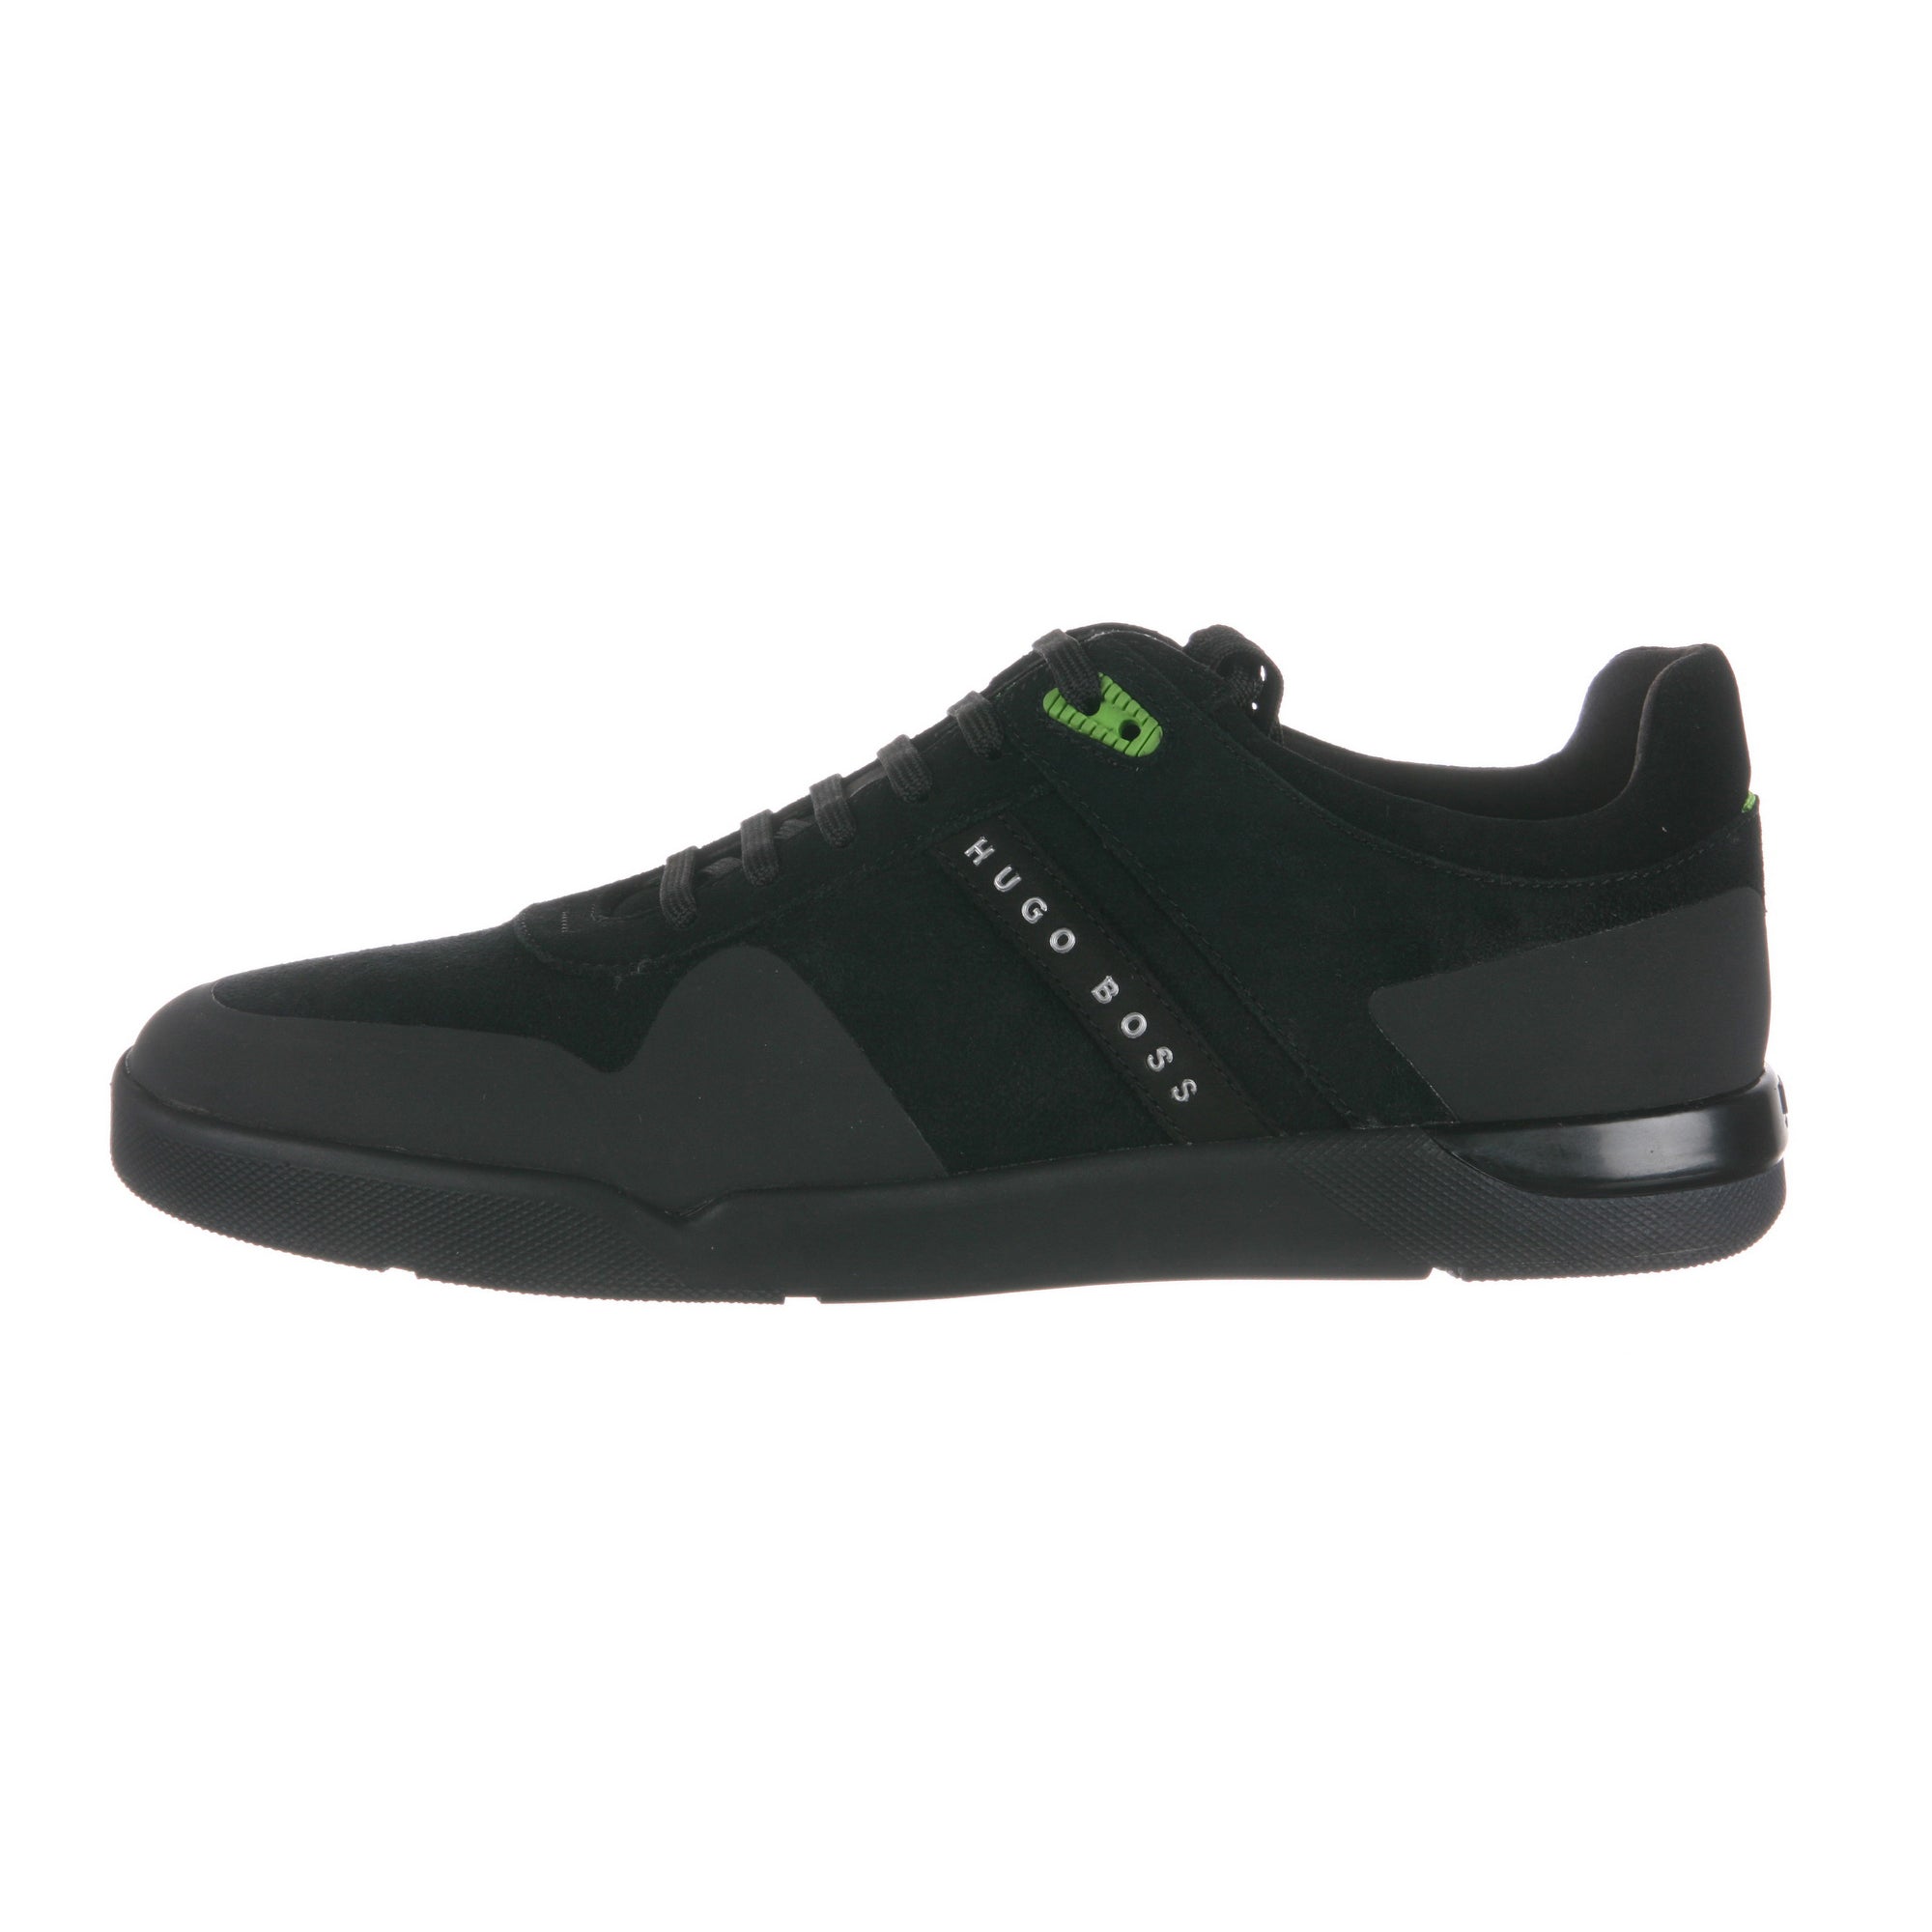 Leather low trainers Hugo Boss Black size 43 EU in Leather - 39198960